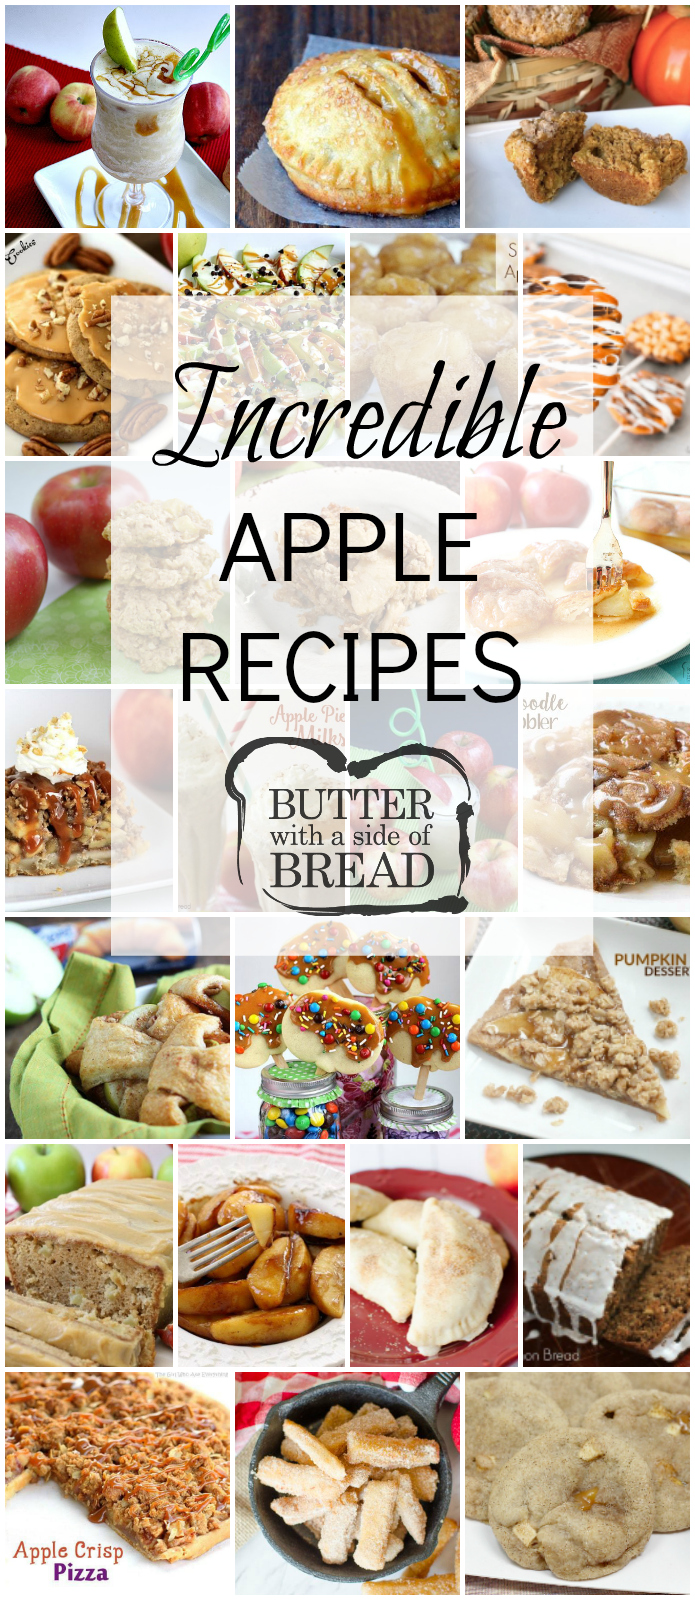 Most Popular Apple Recipes featuring apple desserts, apple snacks, cookies, breads and more. Easy apple recipes for fall baking or any time of the year.